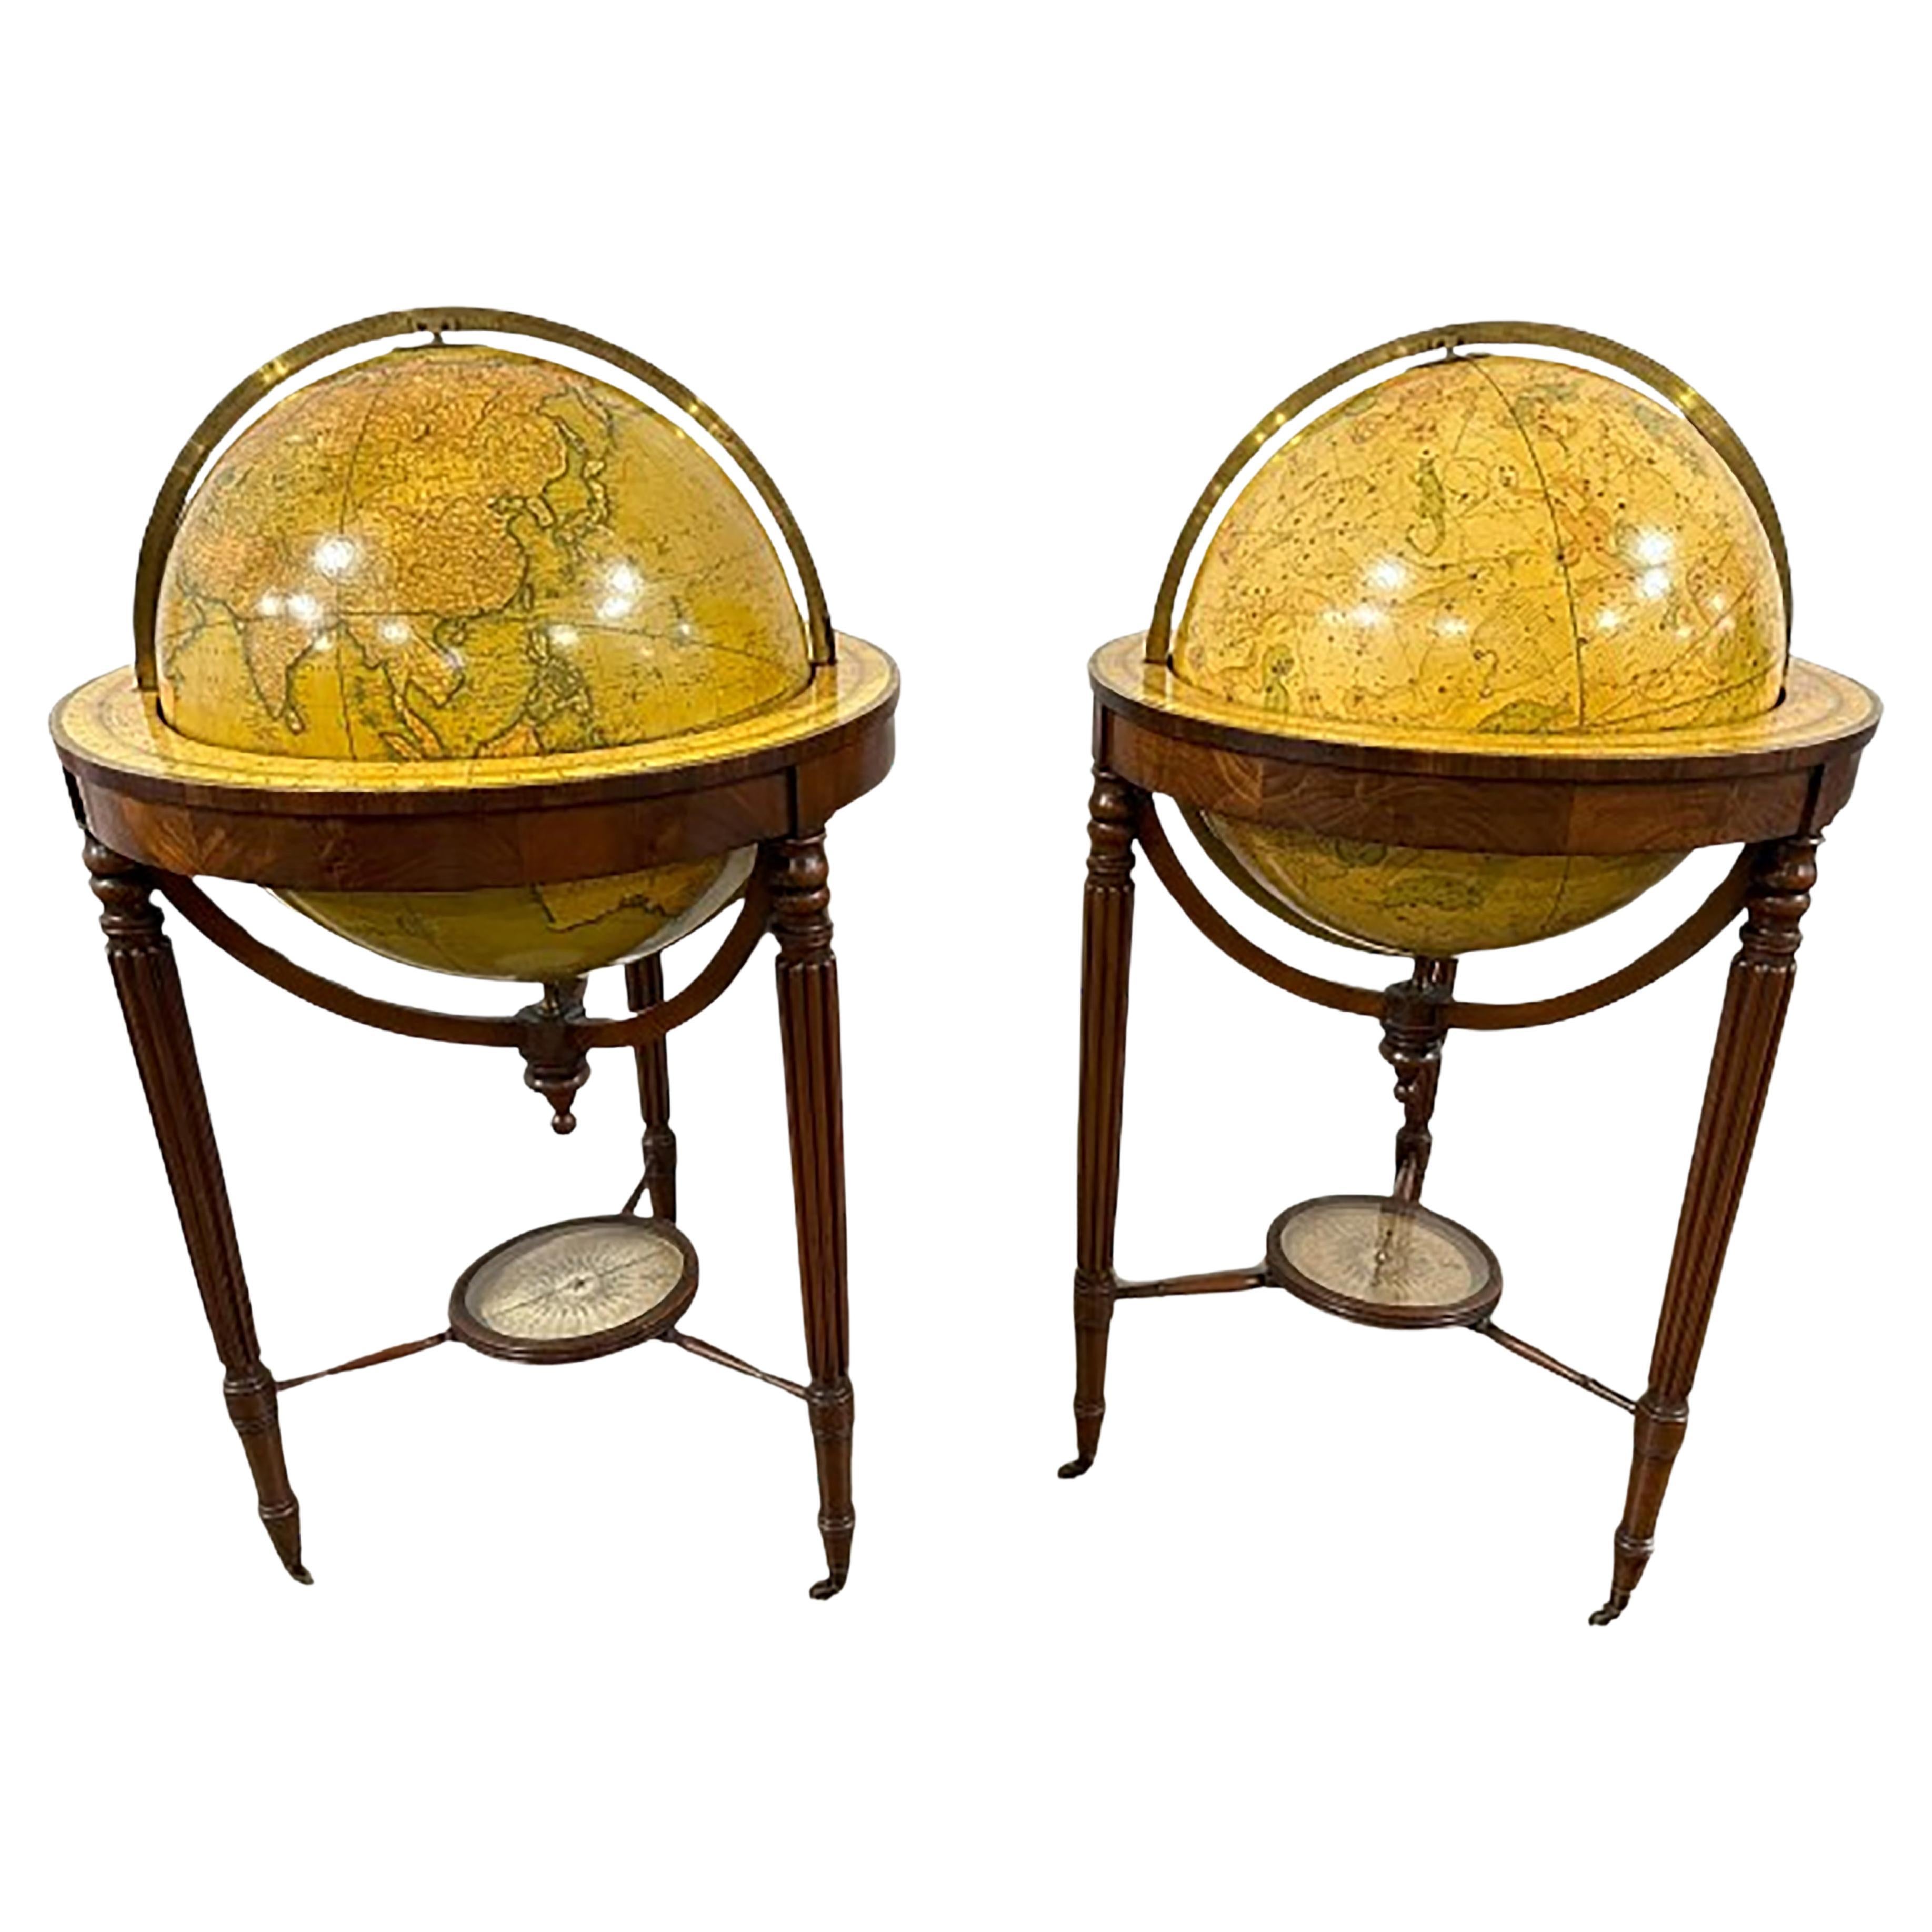 Pair of 19th Century Cruchley Terrestrial Library Globes with Compasses 